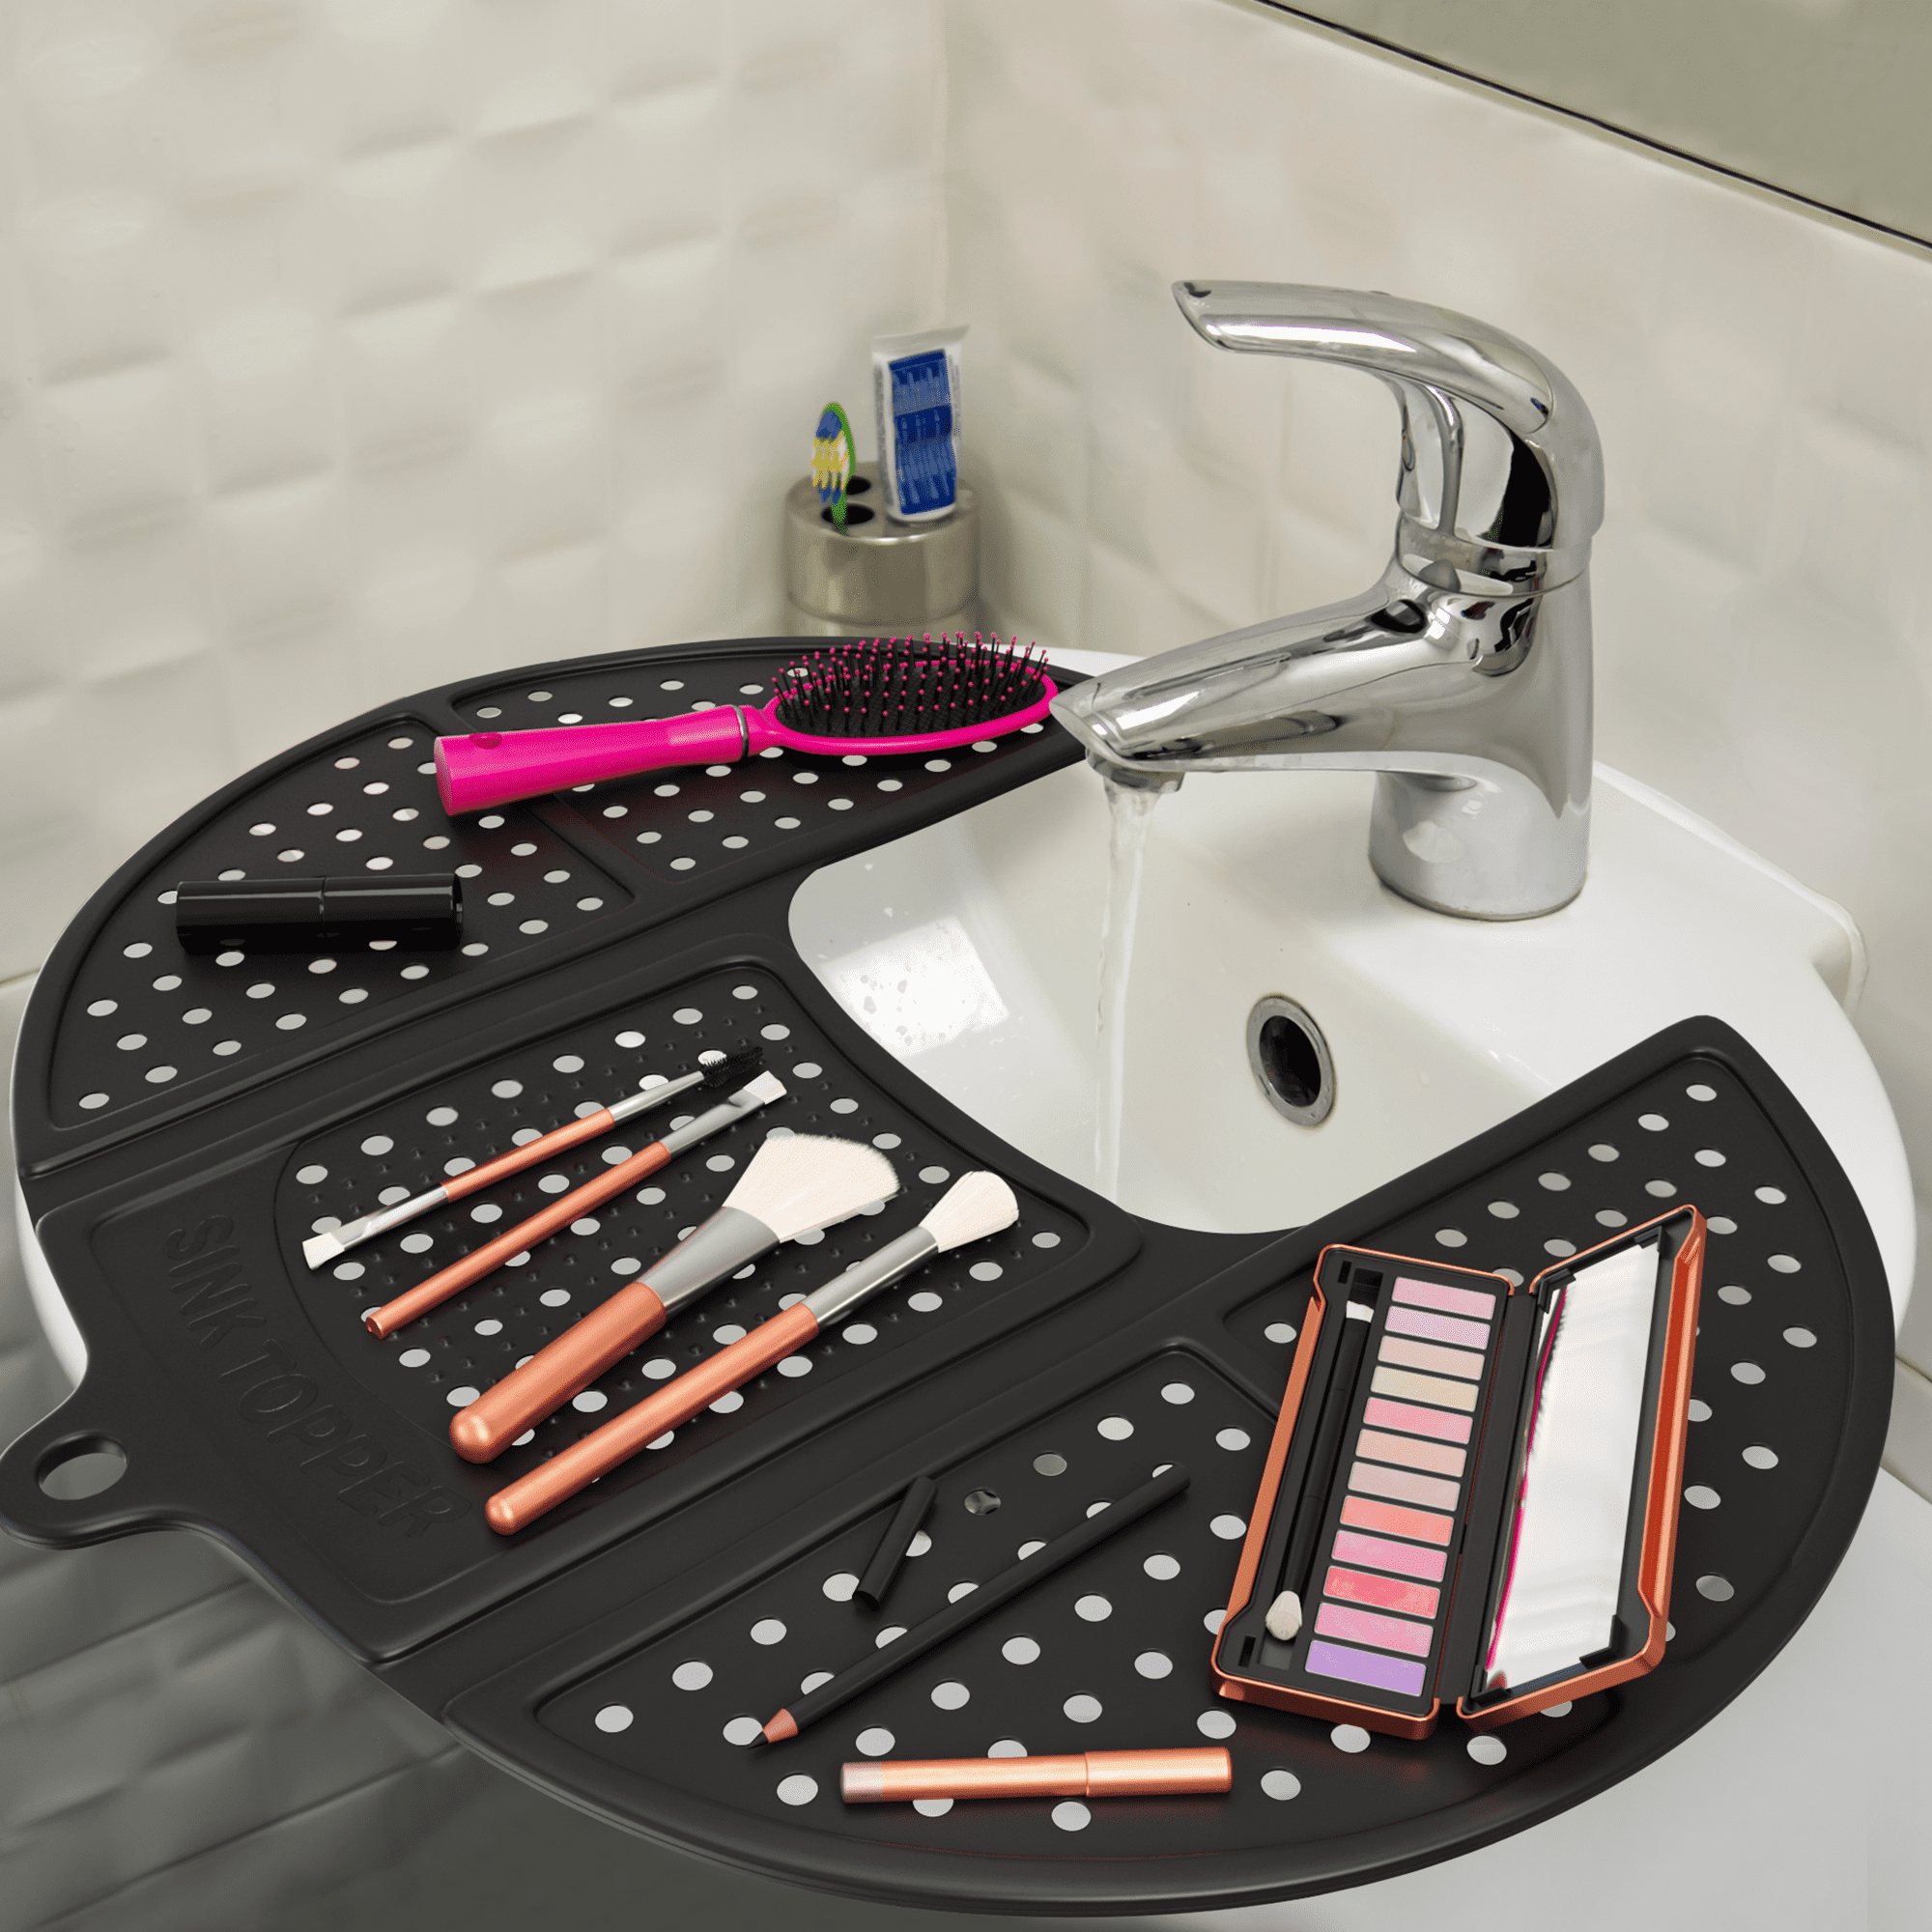  Foldable Bathroom Sink Cover for Counter Space. Makeup Organizer Ma